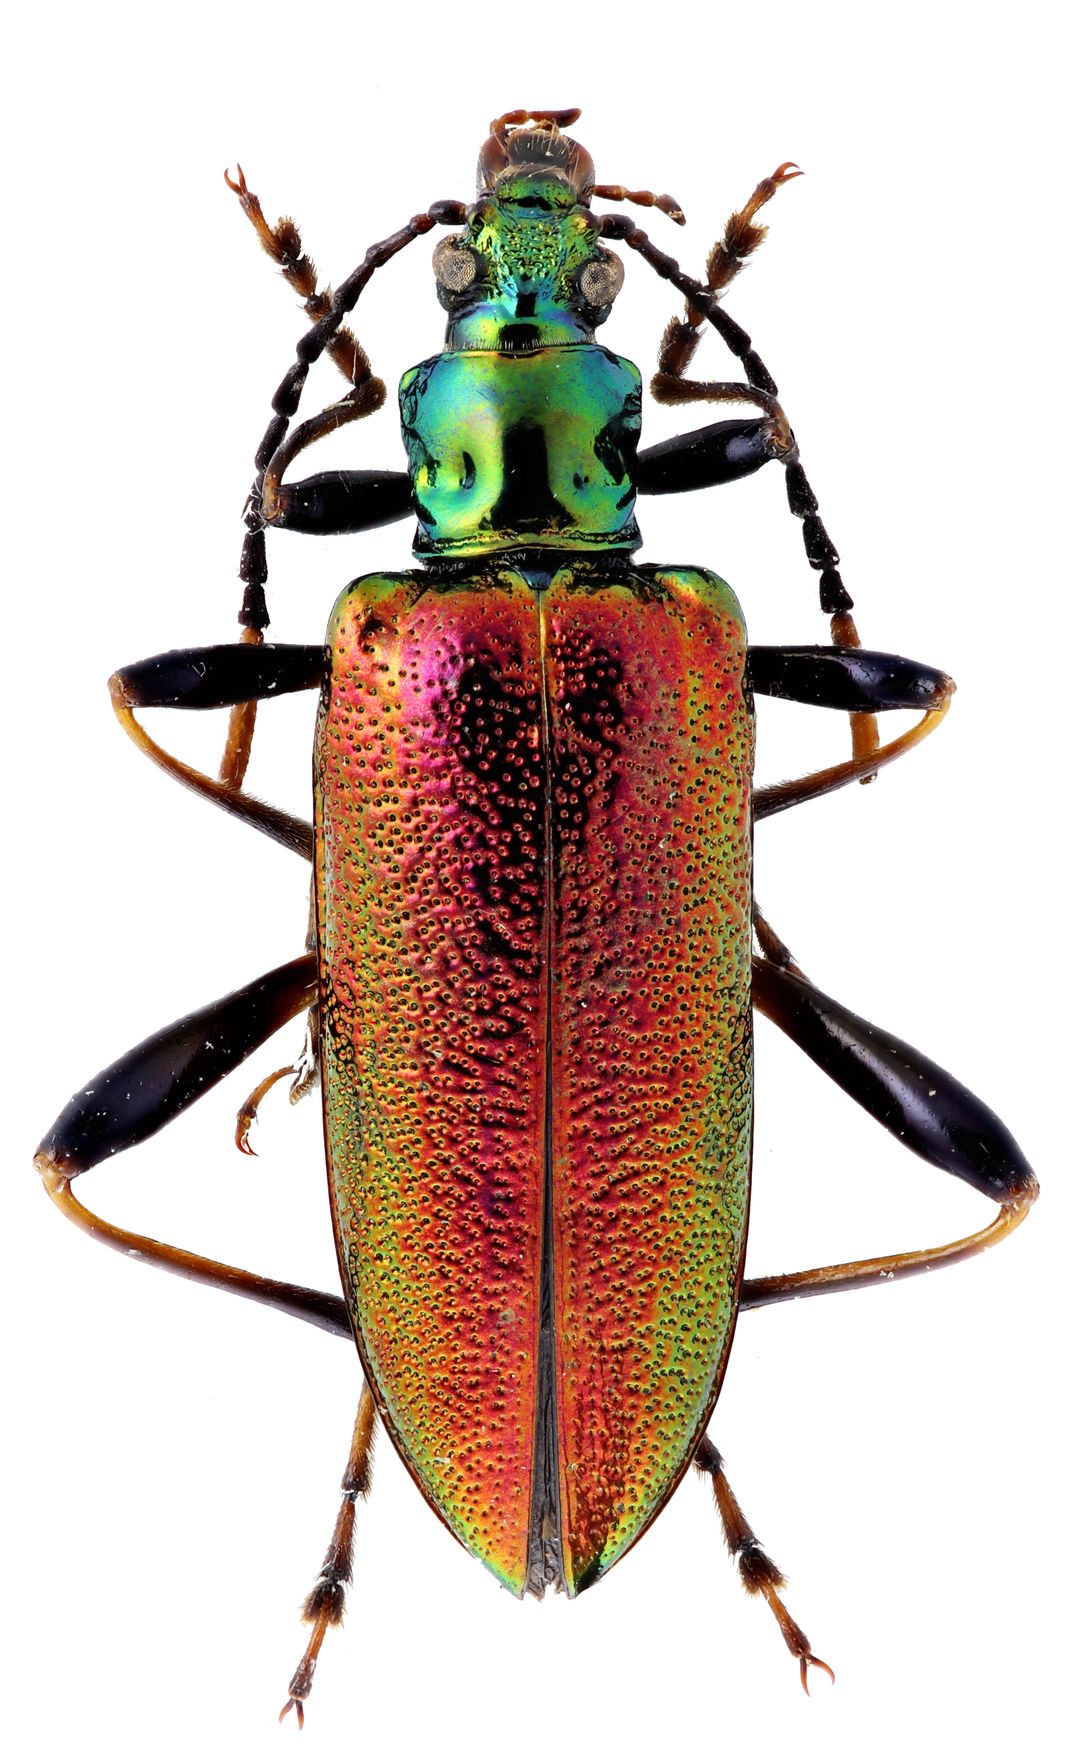 A close-up image of a beetle. It has a red, orange and yellow abdomen with a shiny green head and black legs.